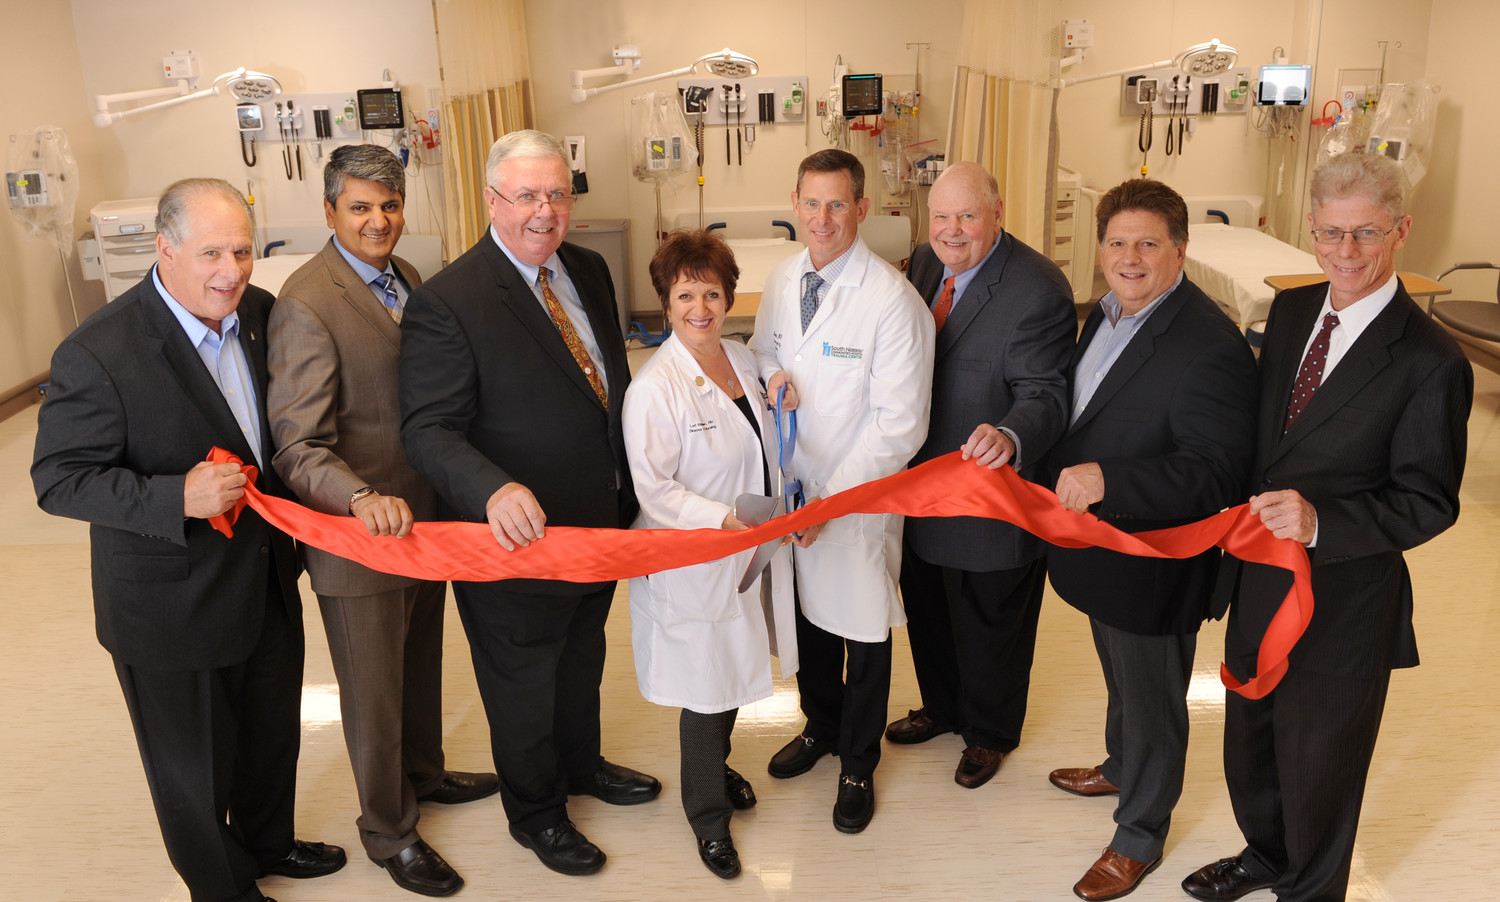 Tony Cancellieri, left, vice chair of the board of directors; Dr. Adhi Sharma, chief medical officer; Richard J. Murphy, president and chief executive officer; Lori Edelman, nurse director of Emergency Services; Dr. Joshua Kugler, chair of Emergency Services; Joseph Fennessy, chair of the board of directors; Joel Schneider, board member and chair of the Emergency Services Department Expansion Campaign; Bill Allison, senior vice president for administration and chief operating officer, at the ribbon cutting celebrating the opening of a new 10-bed treatment bay extension to South Nassau Communities Hospital’s Emergency Services Department.